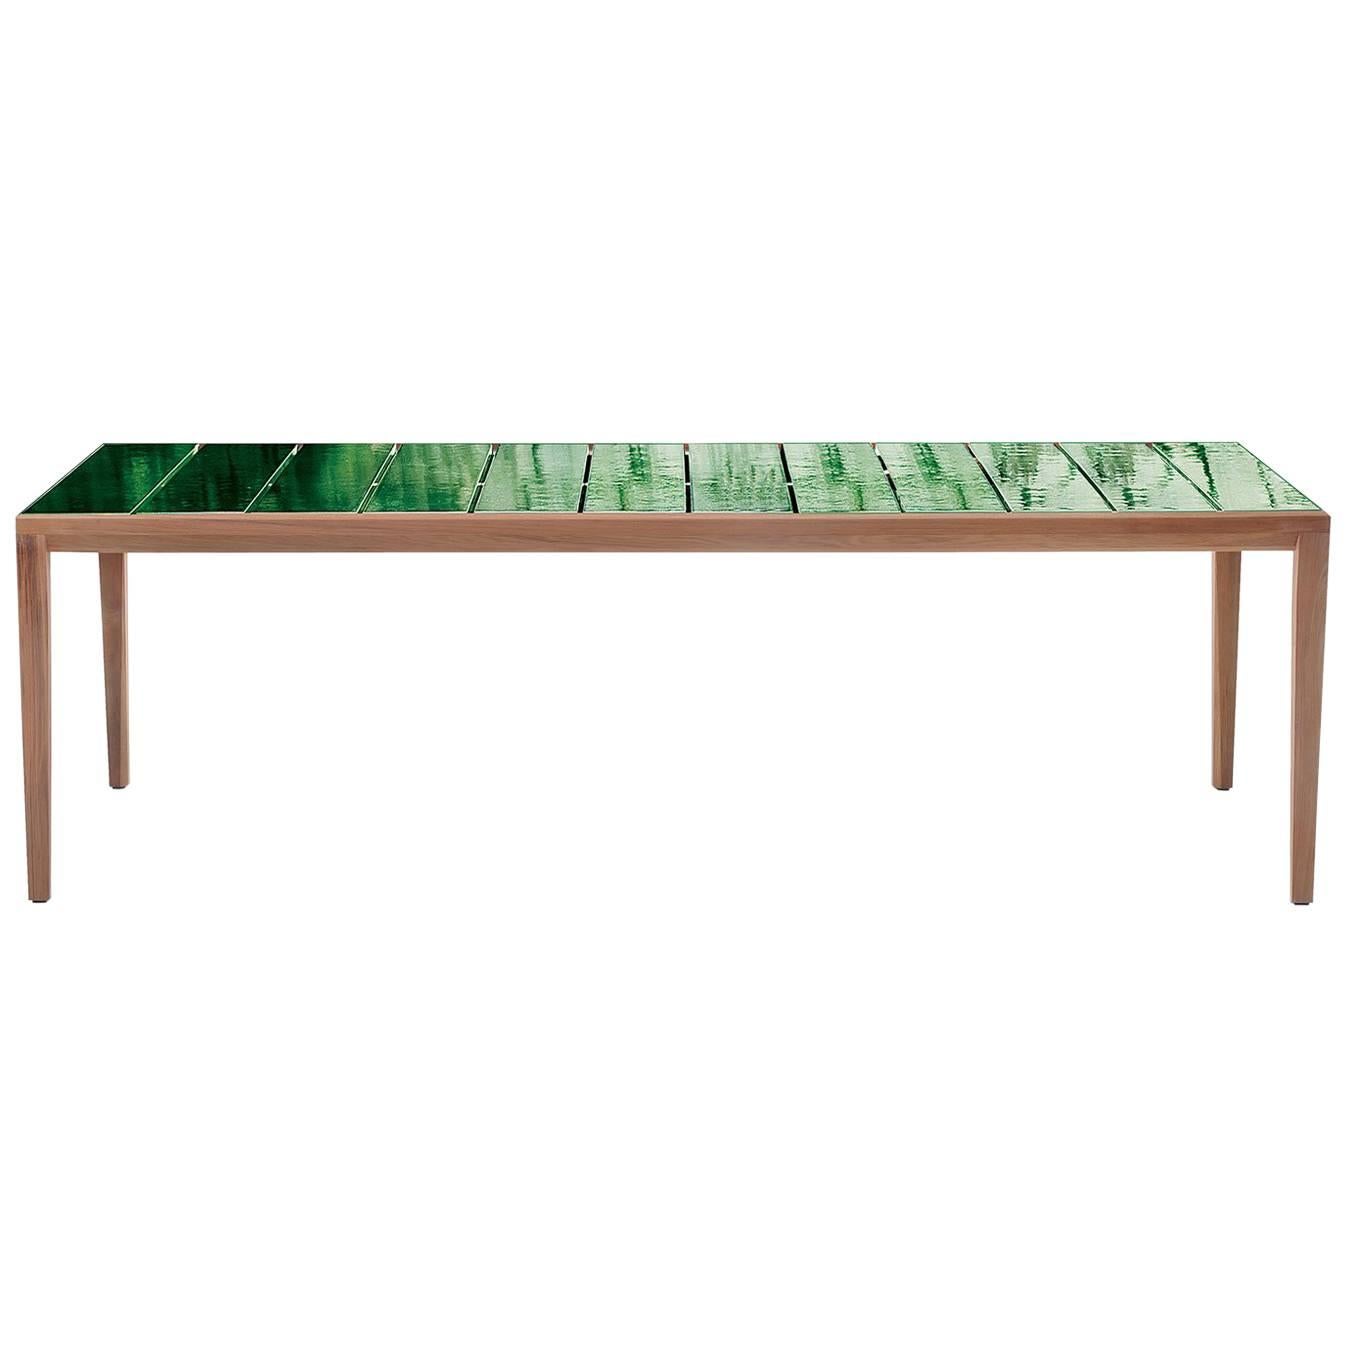 Roda Teka Outdoor 174 Dining Table in Teak with Glazed Stoneware Top